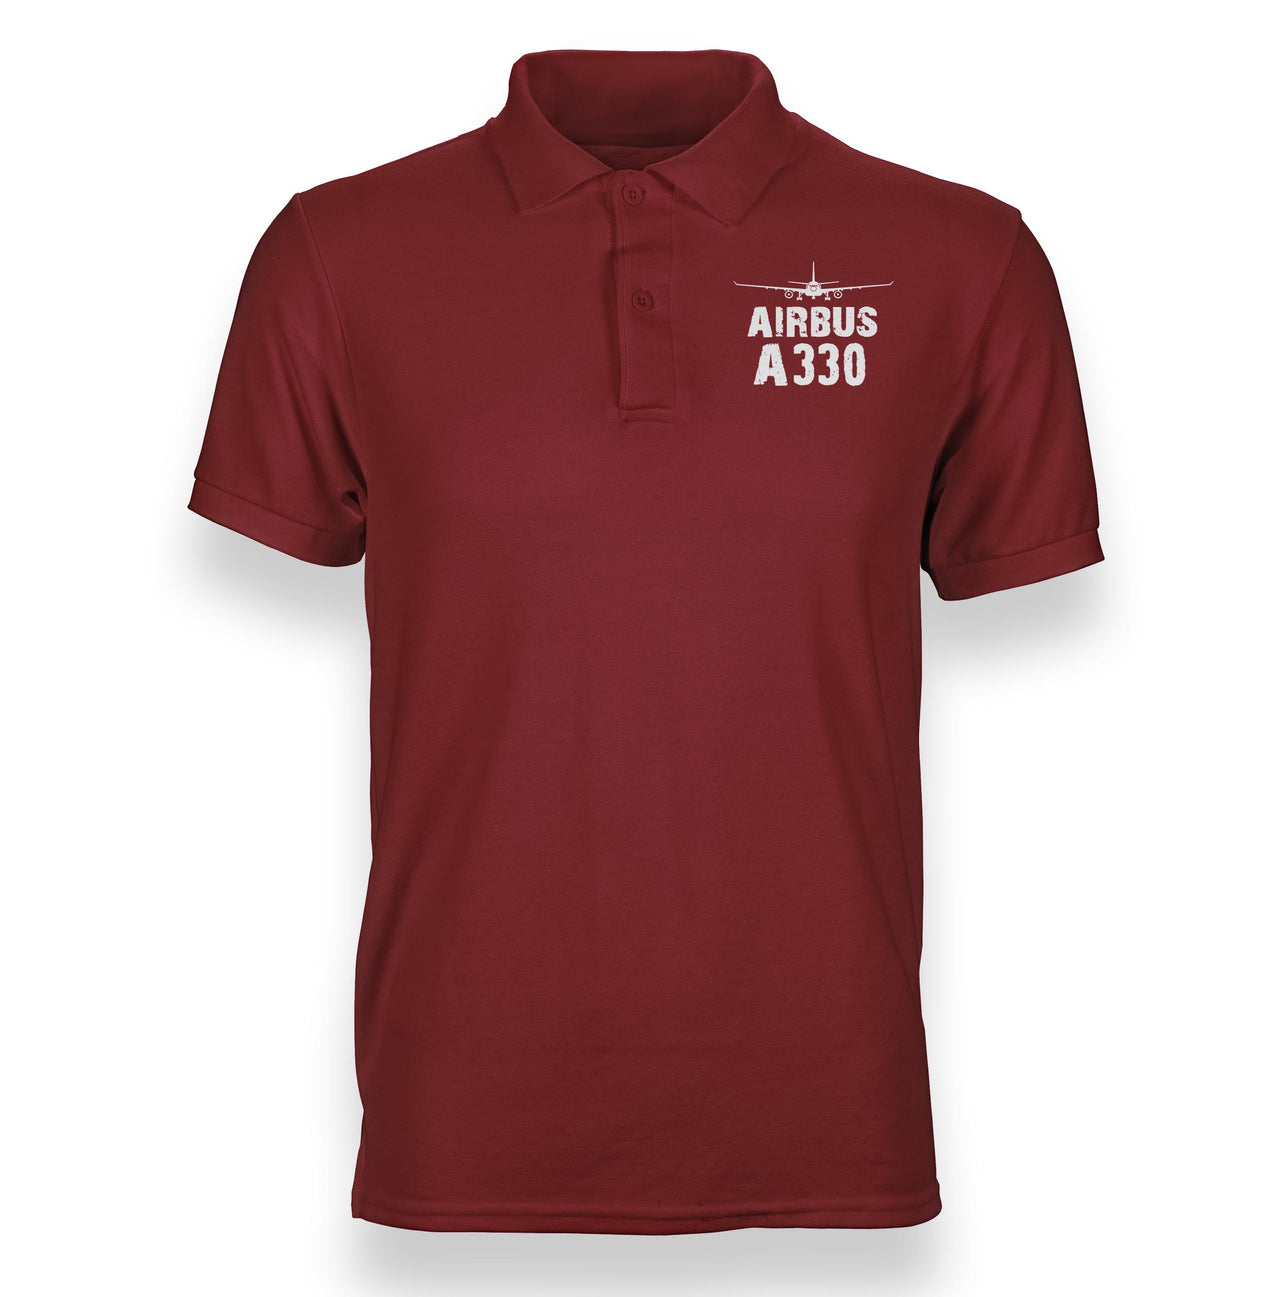 Airbus A330 & Plane Designed Polo T-Shirts